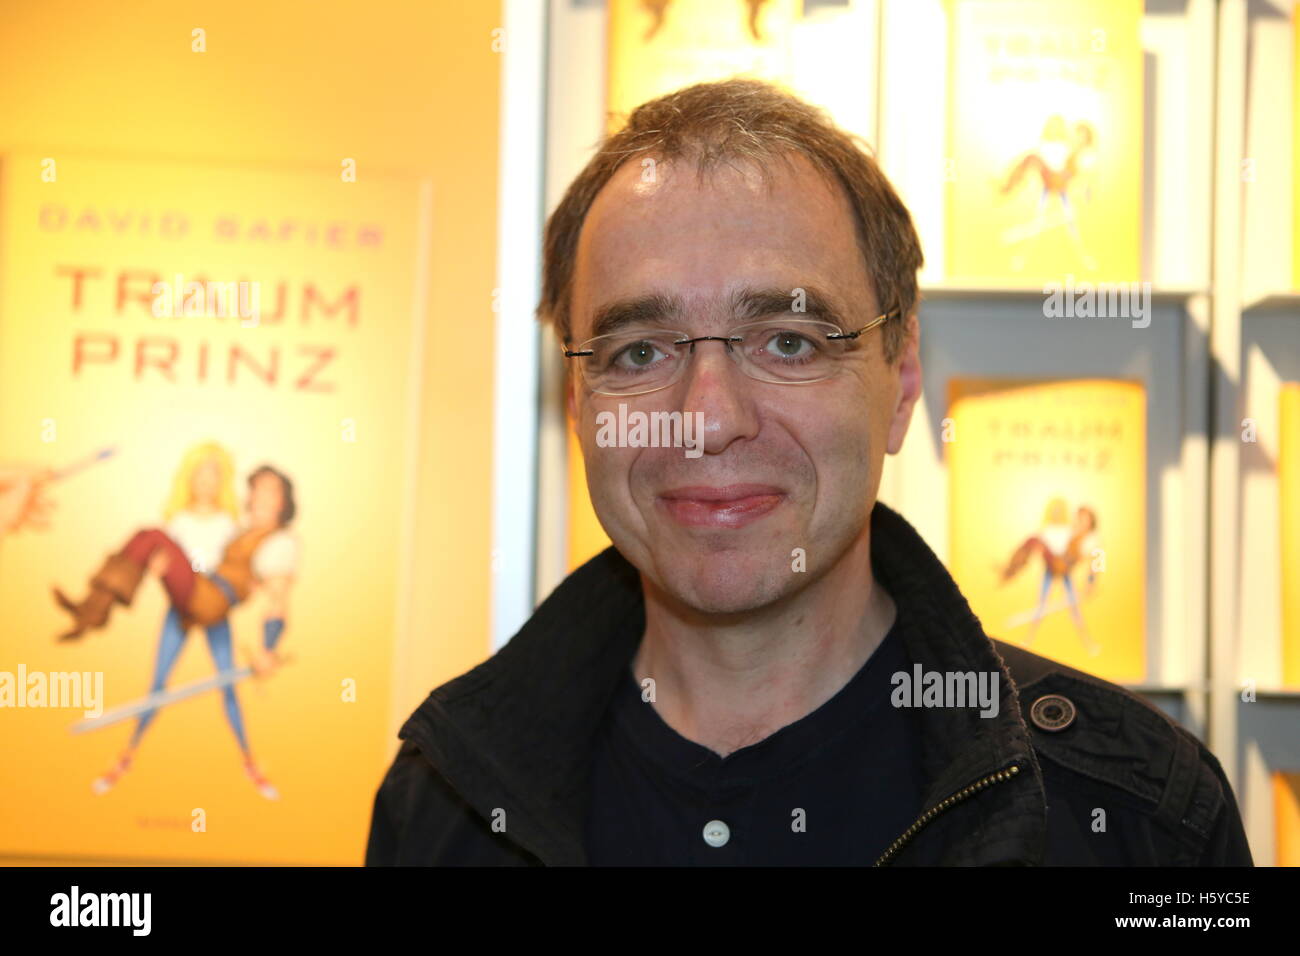 David Safier presenting and signing his new book 'Traumprinz' (lit. 'Dream Prince') at the stand of Rowohlt publisher at the Frankfurt Book Fair in Frankfurt/Main, Germany, 20 October 2016. PHOTO: SUSANNAH V. VERGAU/dpa - NO WIRE SERVICE - Stock Photo